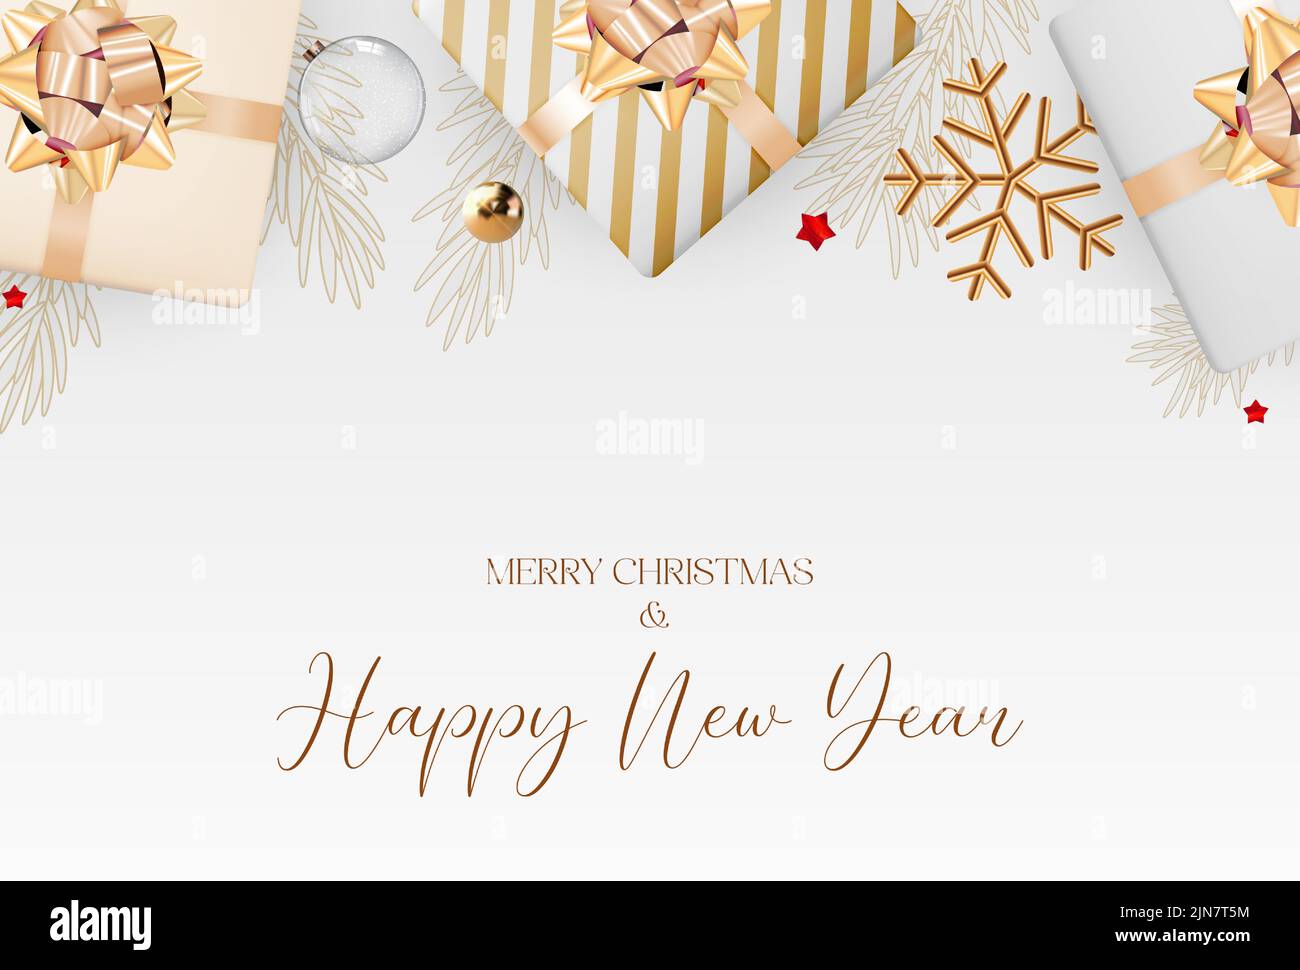 Merry Christmas and Happy New Year Greeting Card Stock Vector